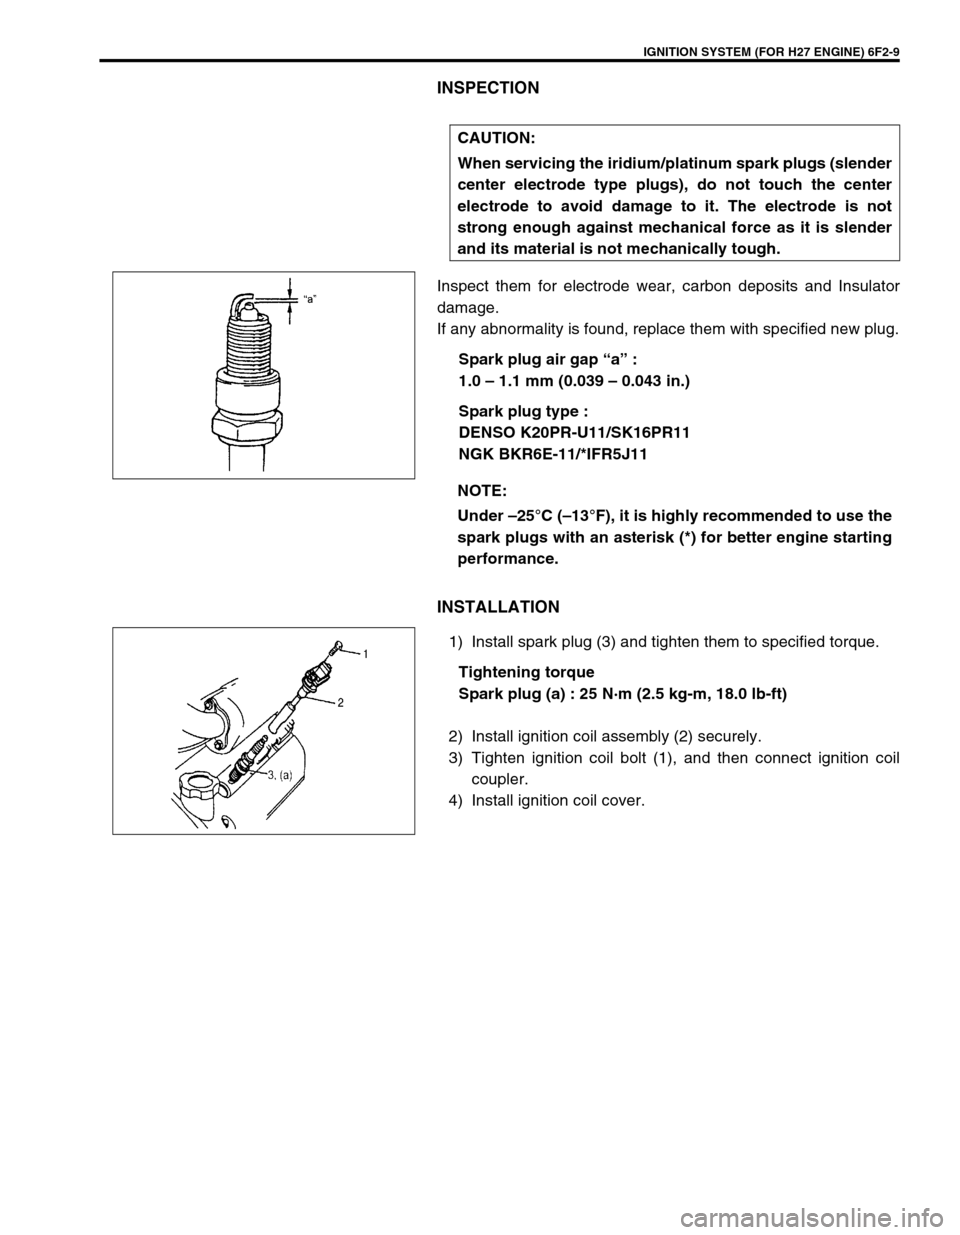 SUZUKI GRAND VITARA 2001 2.G Owners Manual IGNITION SYSTEM (FOR H27 ENGINE) 6F2-9
INSPECTION
Inspect them for electrode wear, carbon deposits and Insulator
damage.
If any abnormality is found, replace them with specified new plug.
Spark plug a